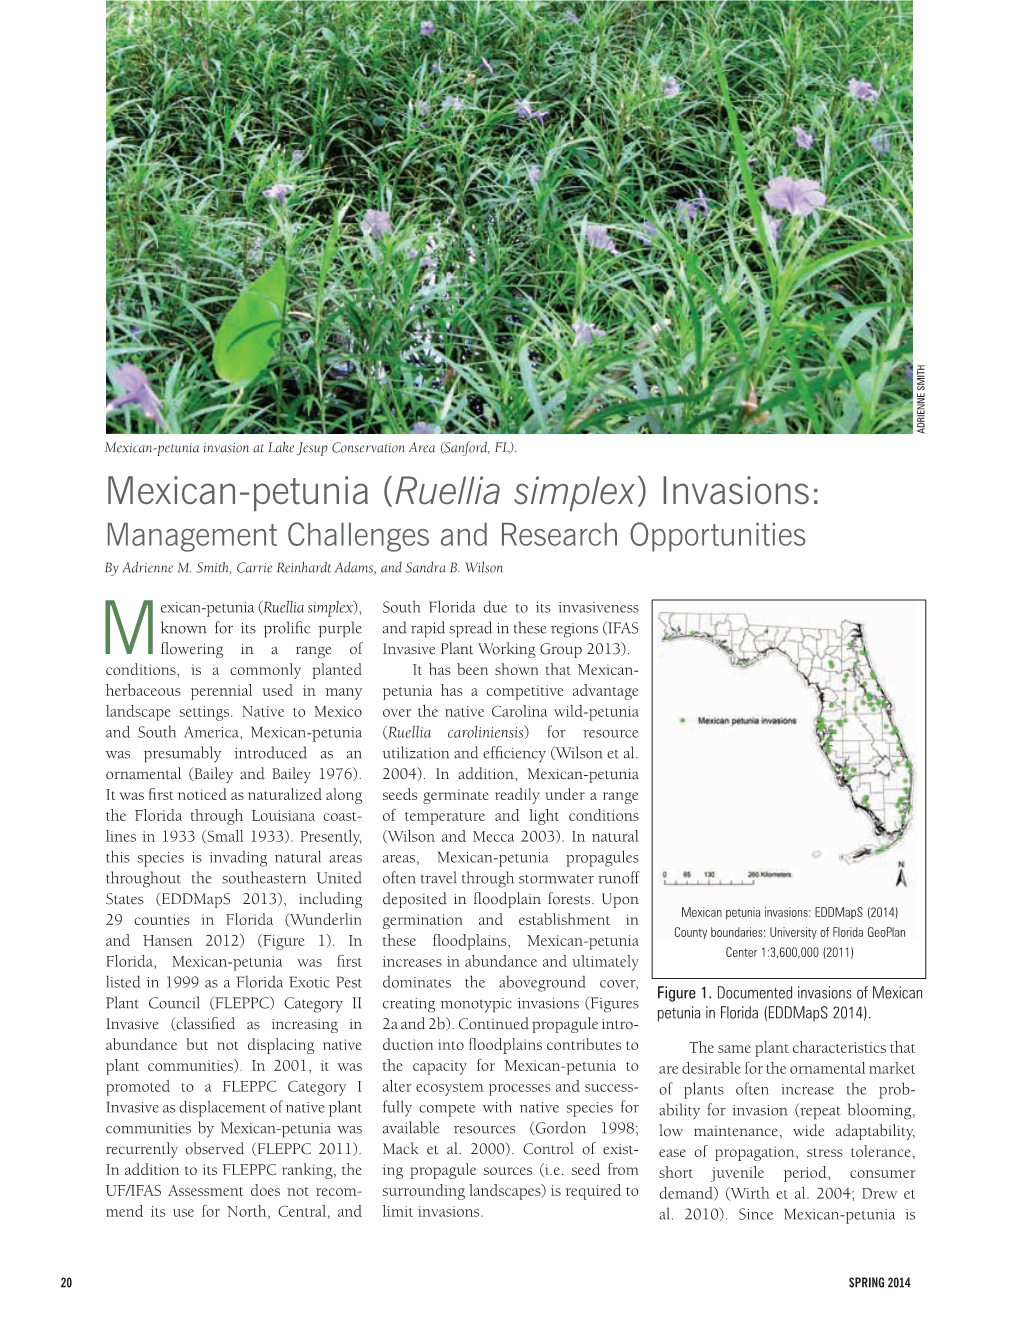 Mexican-Petunia (Ruellia Simplex) Invasions: Management Challenges and Research Opportunities by Adrienne M